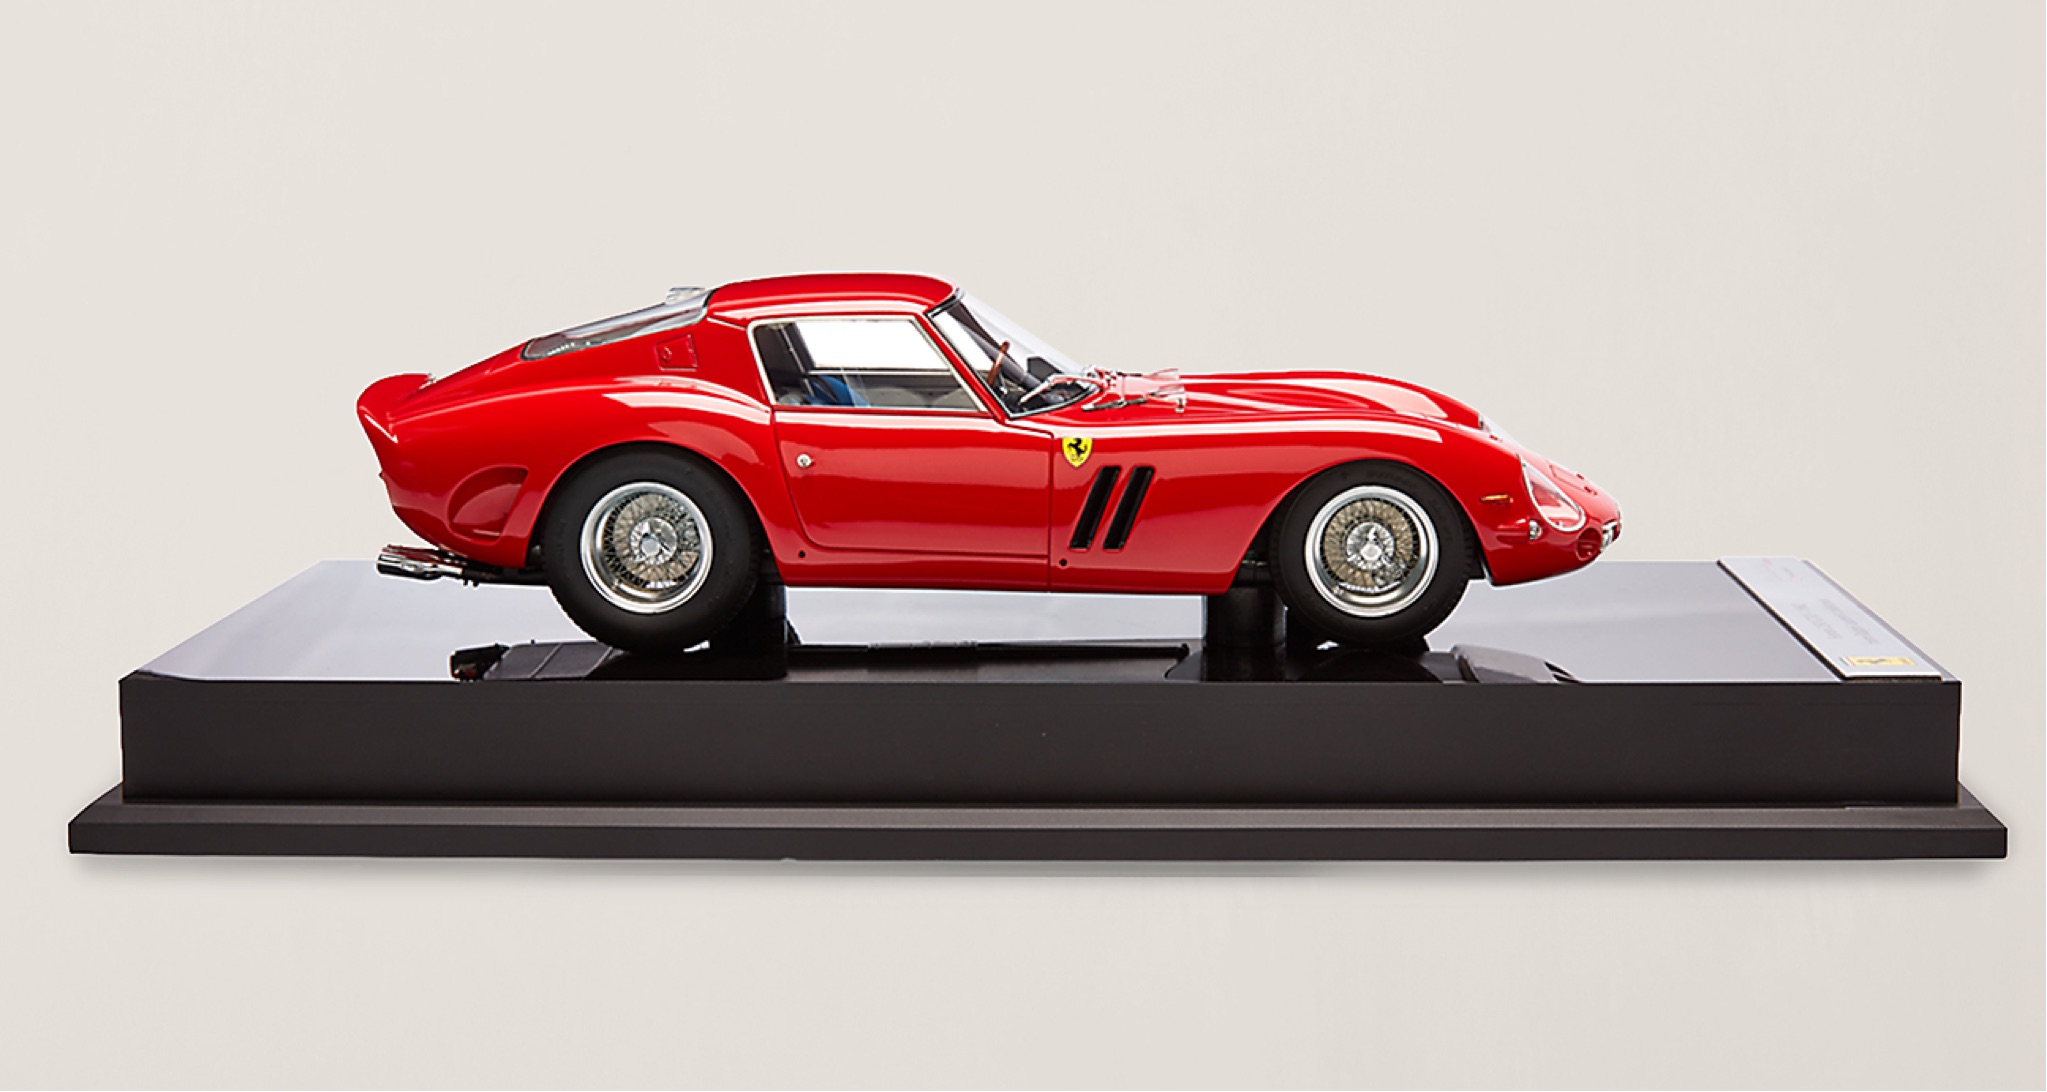 <span>“I got hooked on the Ferrari after driving it only once,” Mr. Lauren has said. His 1962 Ferrari 250 GTO is one of Sergio Scaglietti’s most celebrated designs </span><br/><a href="https://www.ralphlauren.com/home-decor-decorative-accessories/ferrari-250-gto/453618.html?dwvar453618_colorname=Red" target="_blank" class="rlc-linecta rlc-lineplay"><span>SHOP NOW</span></a>